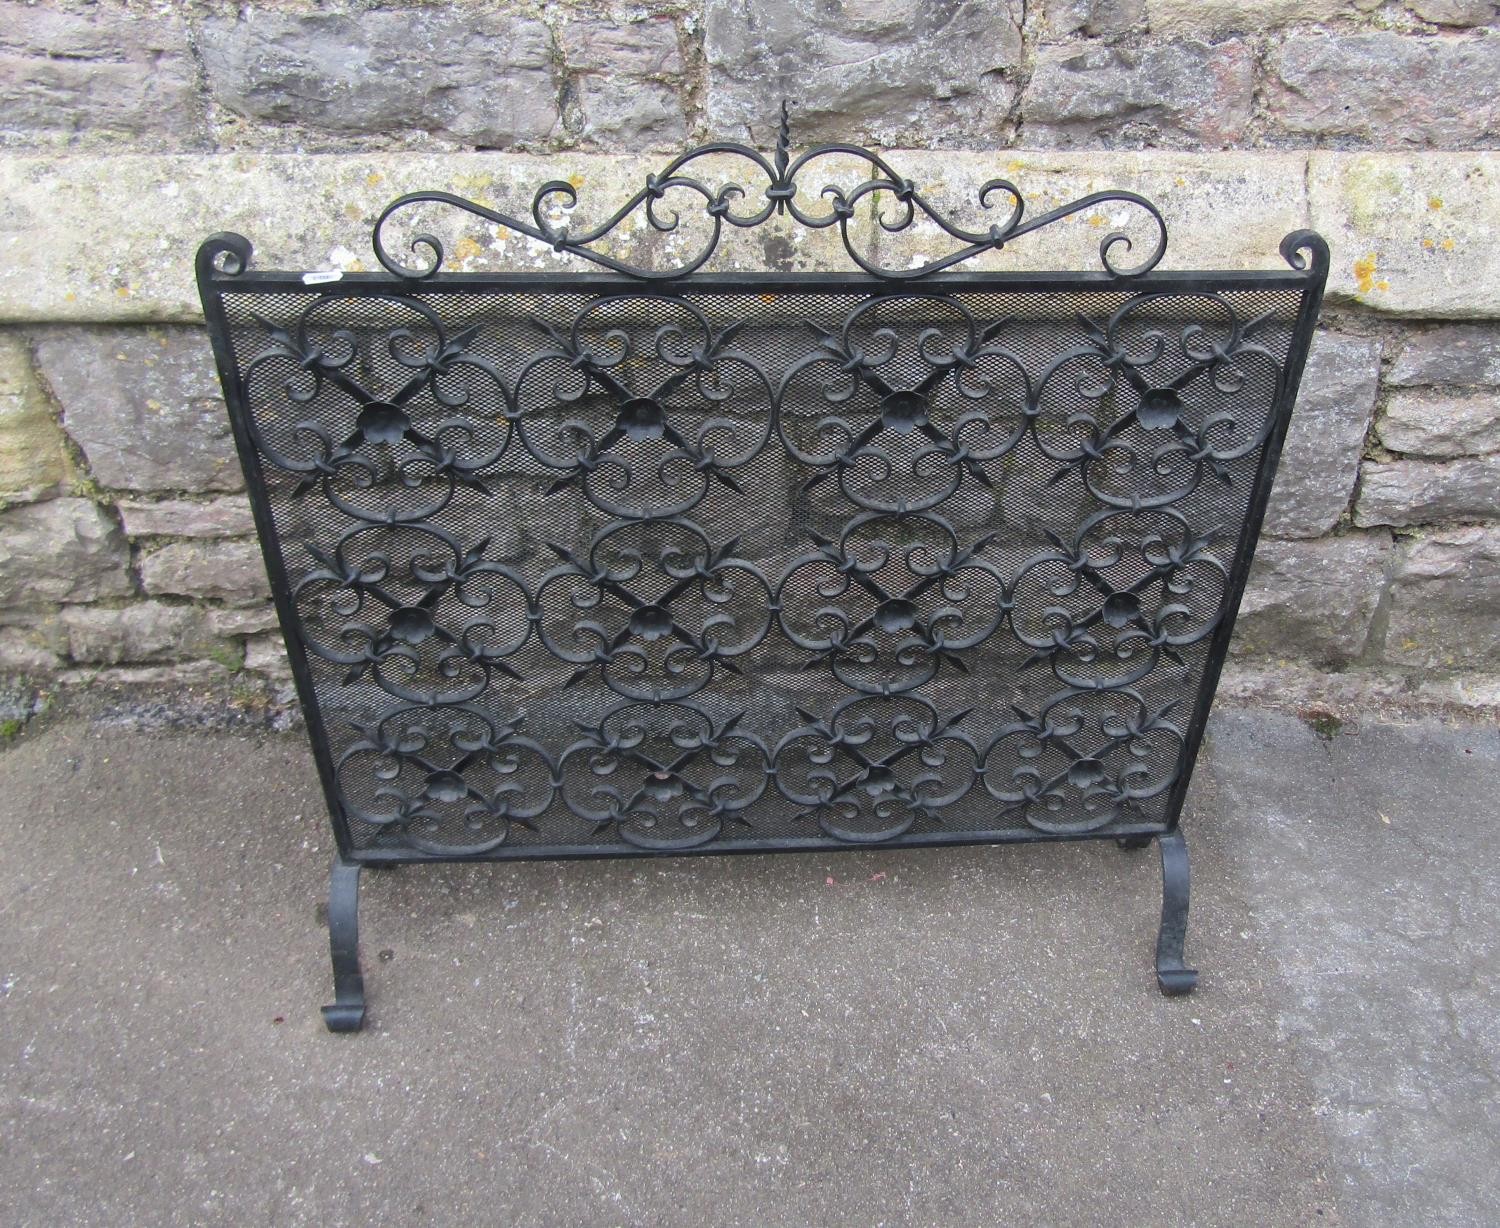 A heavy gauge decorative iron work fire guard, 83 cm (full height) x 82 cm full width - Image 2 of 3